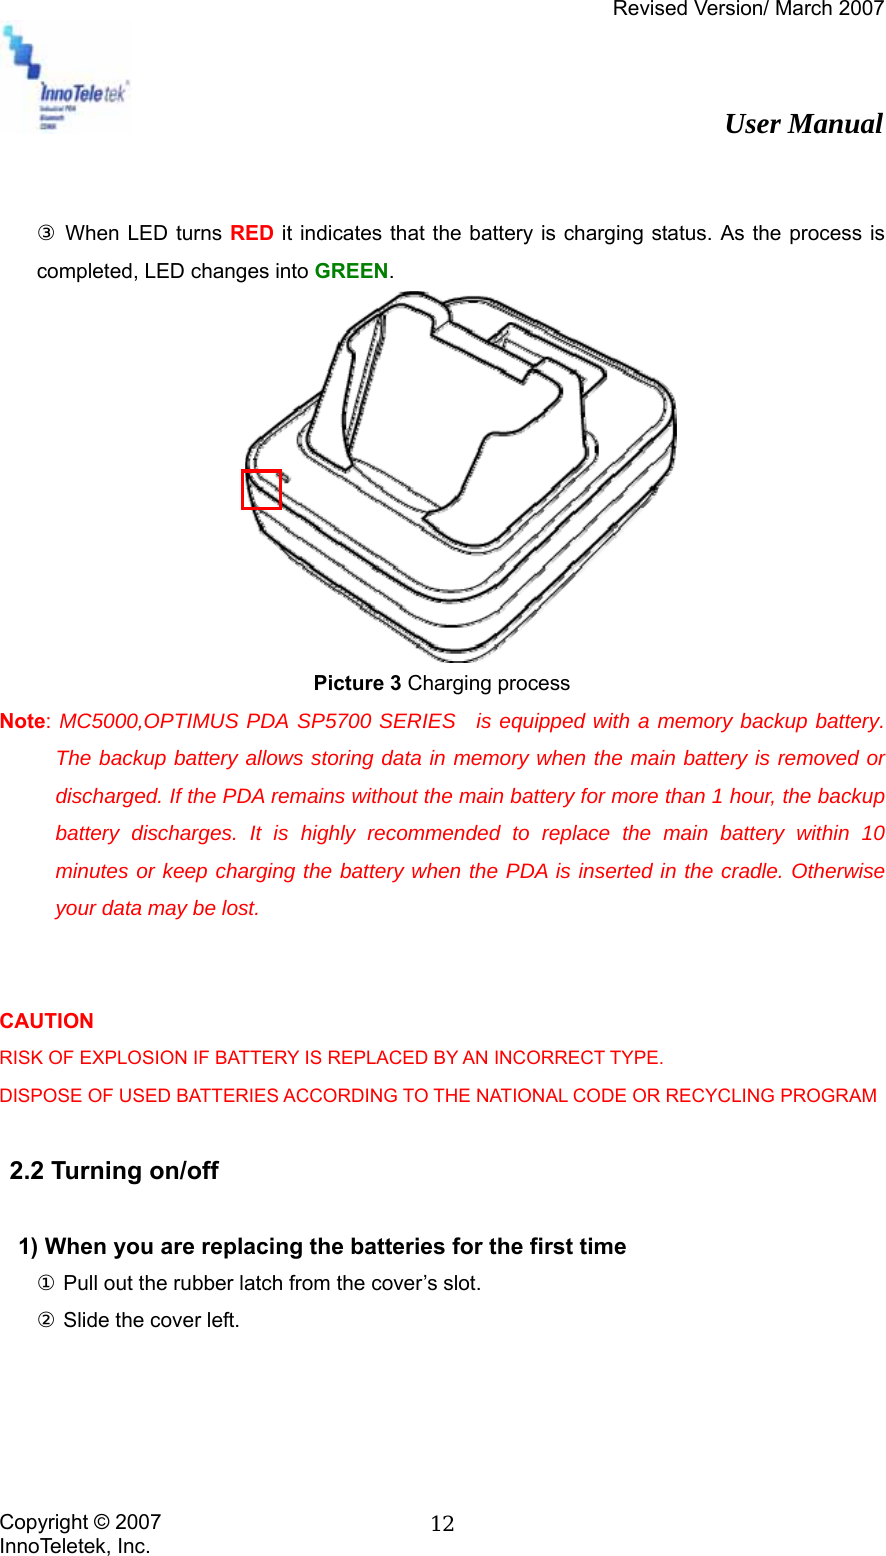 Revised Version/ March 2007                                                          User Manual Copyright © 2007 InnoTeletek, Inc.  12  ③ When LED turns RED it indicates that the battery is charging status. As the process is completed, LED changes into GREEN.  Picture 3 Charging process   Note: MC5000,OPTIMUS PDA SP5700 SERIES  is equipped with a memory backup battery. The backup battery allows storing data in memory when the main battery is removed or discharged. If the PDA remains without the main battery for more than 1 hour, the backup battery discharges. It is highly recommended to replace the main battery within 10 minutes or keep charging the battery when the PDA is inserted in the cradle. Otherwise your data may be lost.   CAUTION RISK OF EXPLOSION IF BATTERY IS REPLACED BY AN INCORRECT TYPE. DISPOSE OF USED BATTERIES ACCORDING TO THE NATIONAL CODE OR RECYCLING PROGRAM   2.2 Turning on/off    1) When you are replacing the batteries for the first time ① Pull out the rubber latch from the cover’s slot. ② Slide the cover left. 